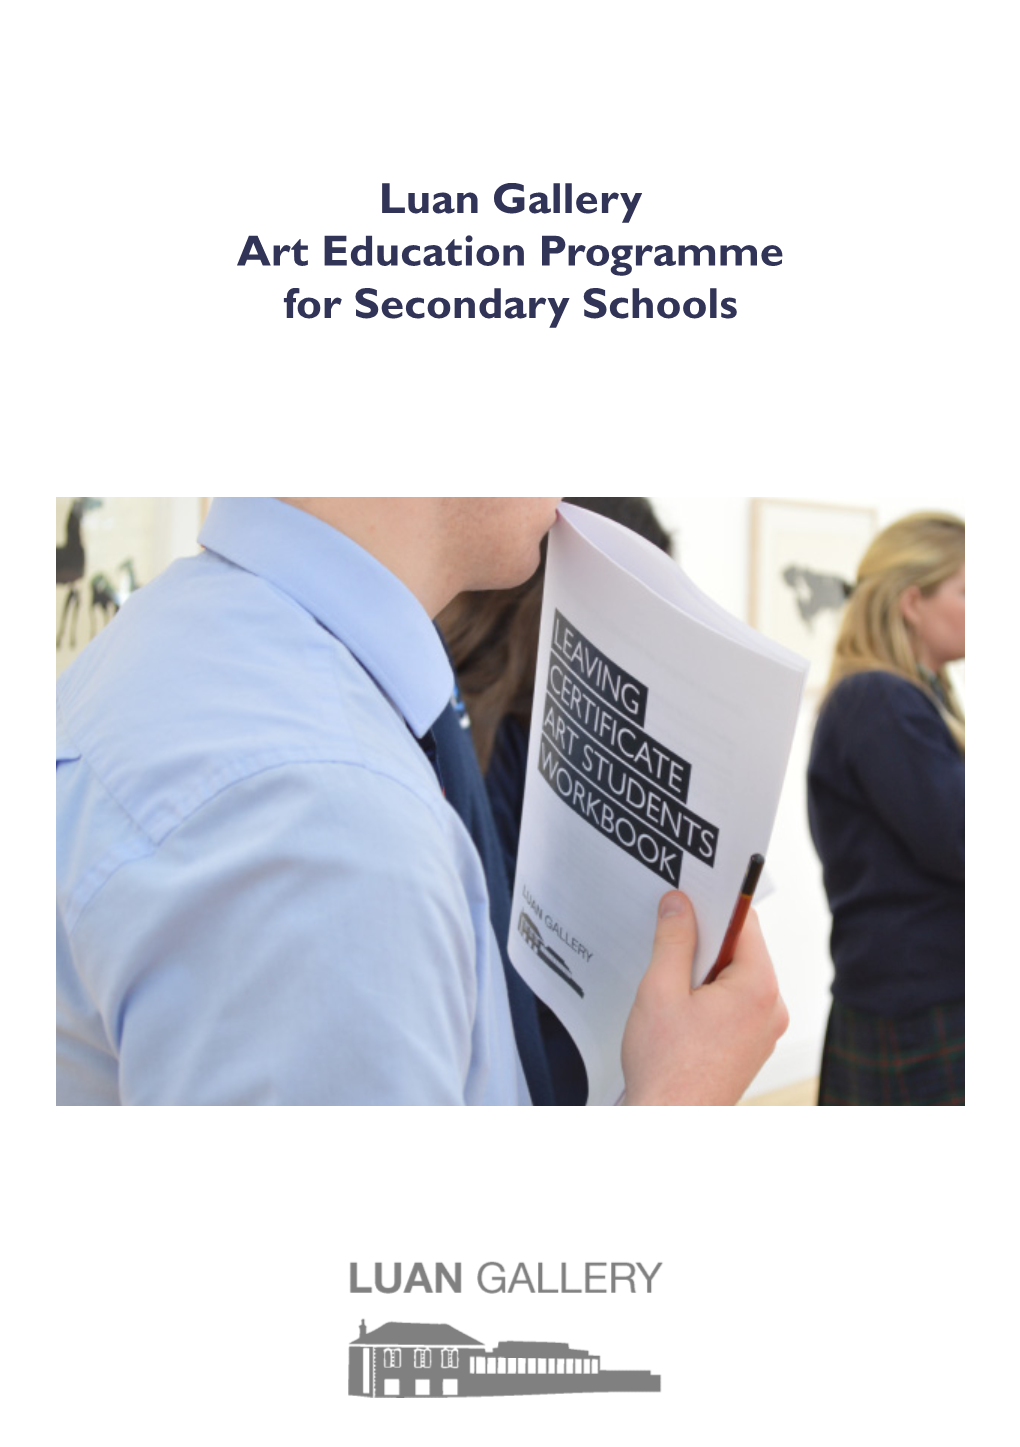 Luan Gallery Art Education Programme for Secondary Schools Encourages Critical Thinking